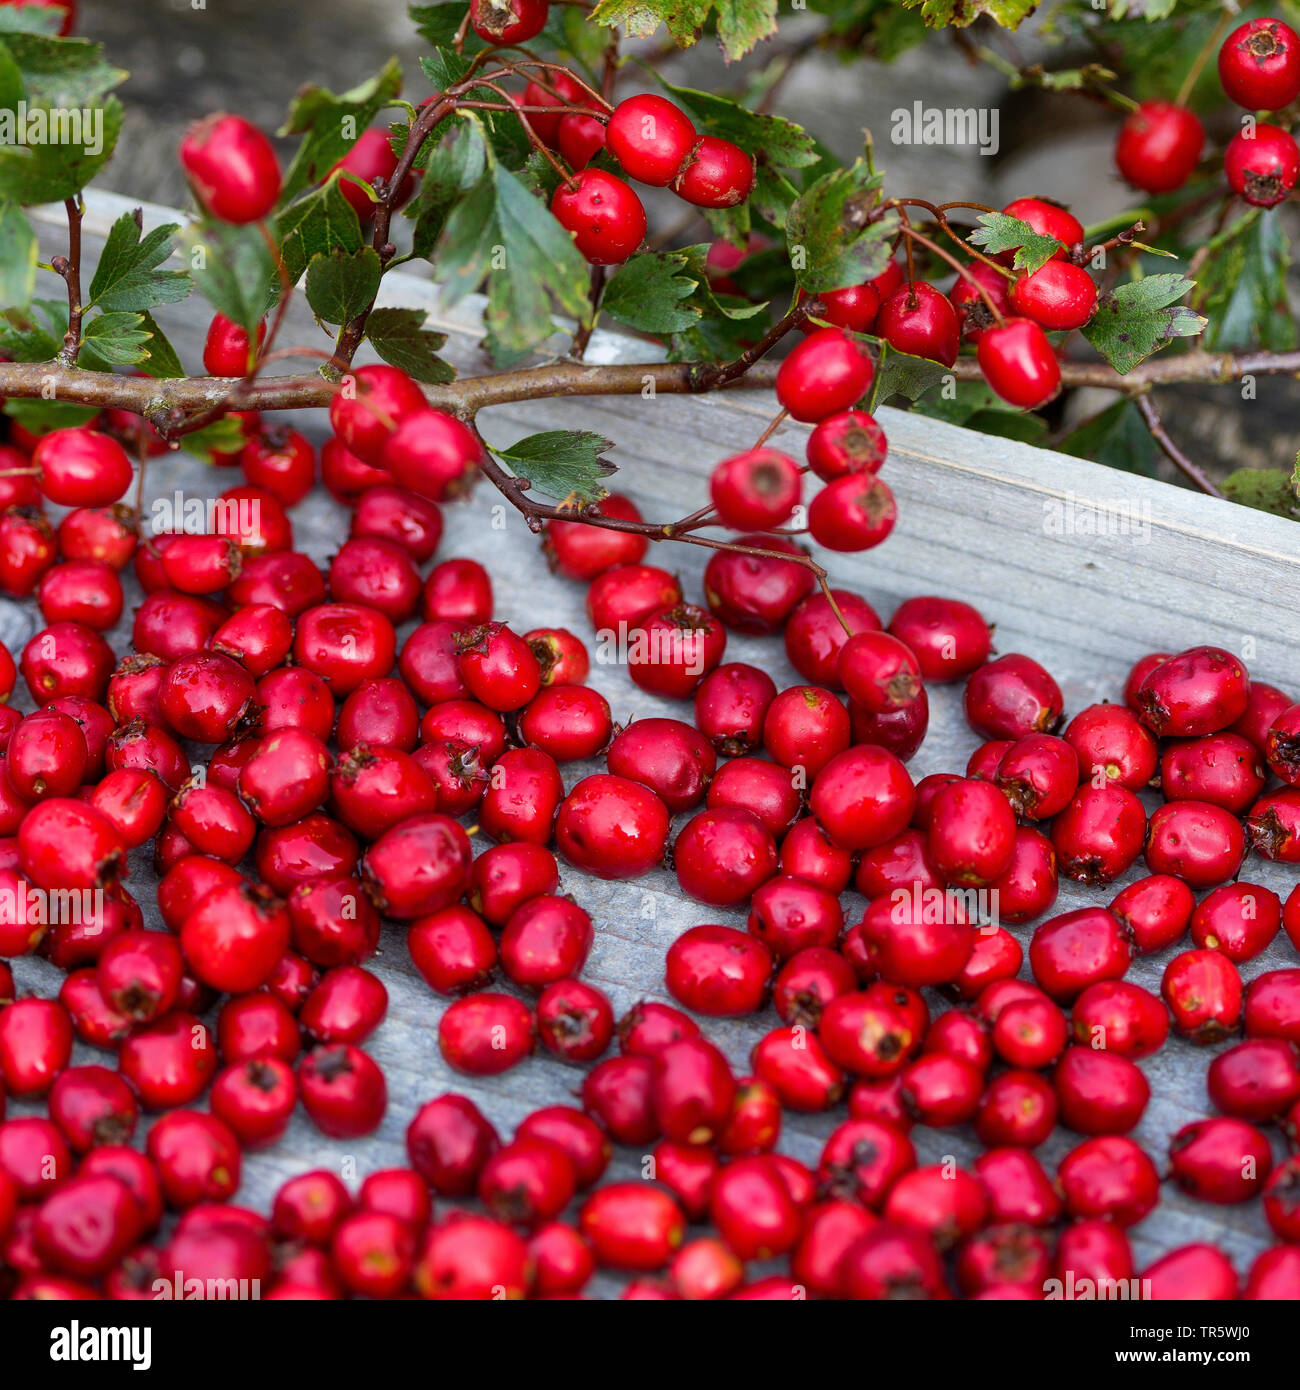 hawthorn, white thorn, hawthorns (Crataegus spec.), collected hawthorn berries, Germany Stock Photo